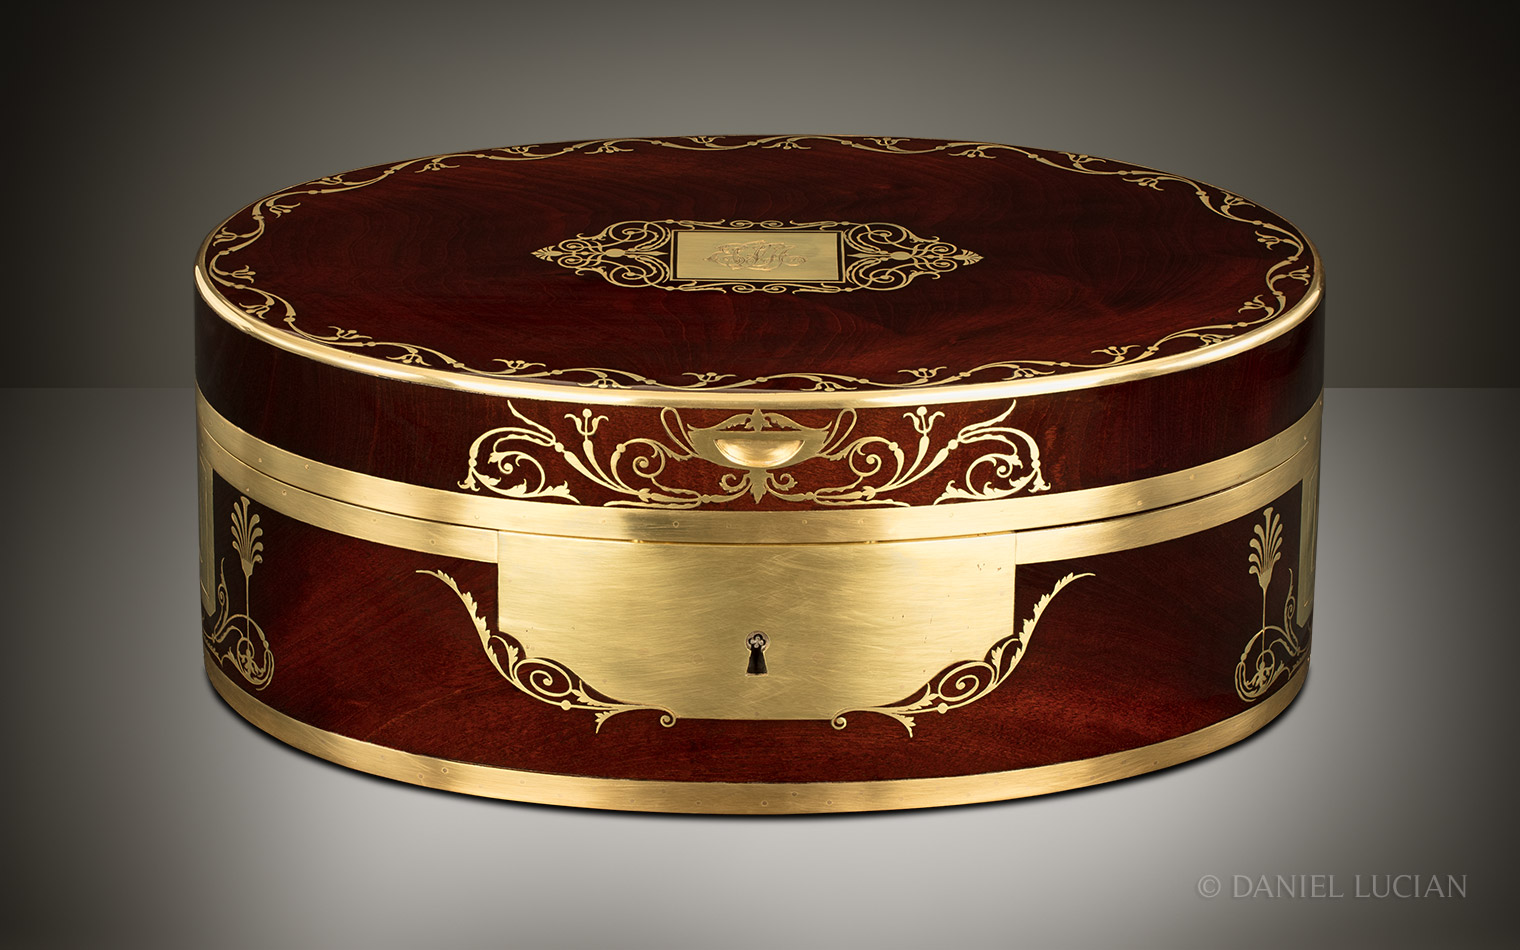 French Antique Jewellery Box in Cuban Mahogany, Attributed to Martin-Guillaume Biennais